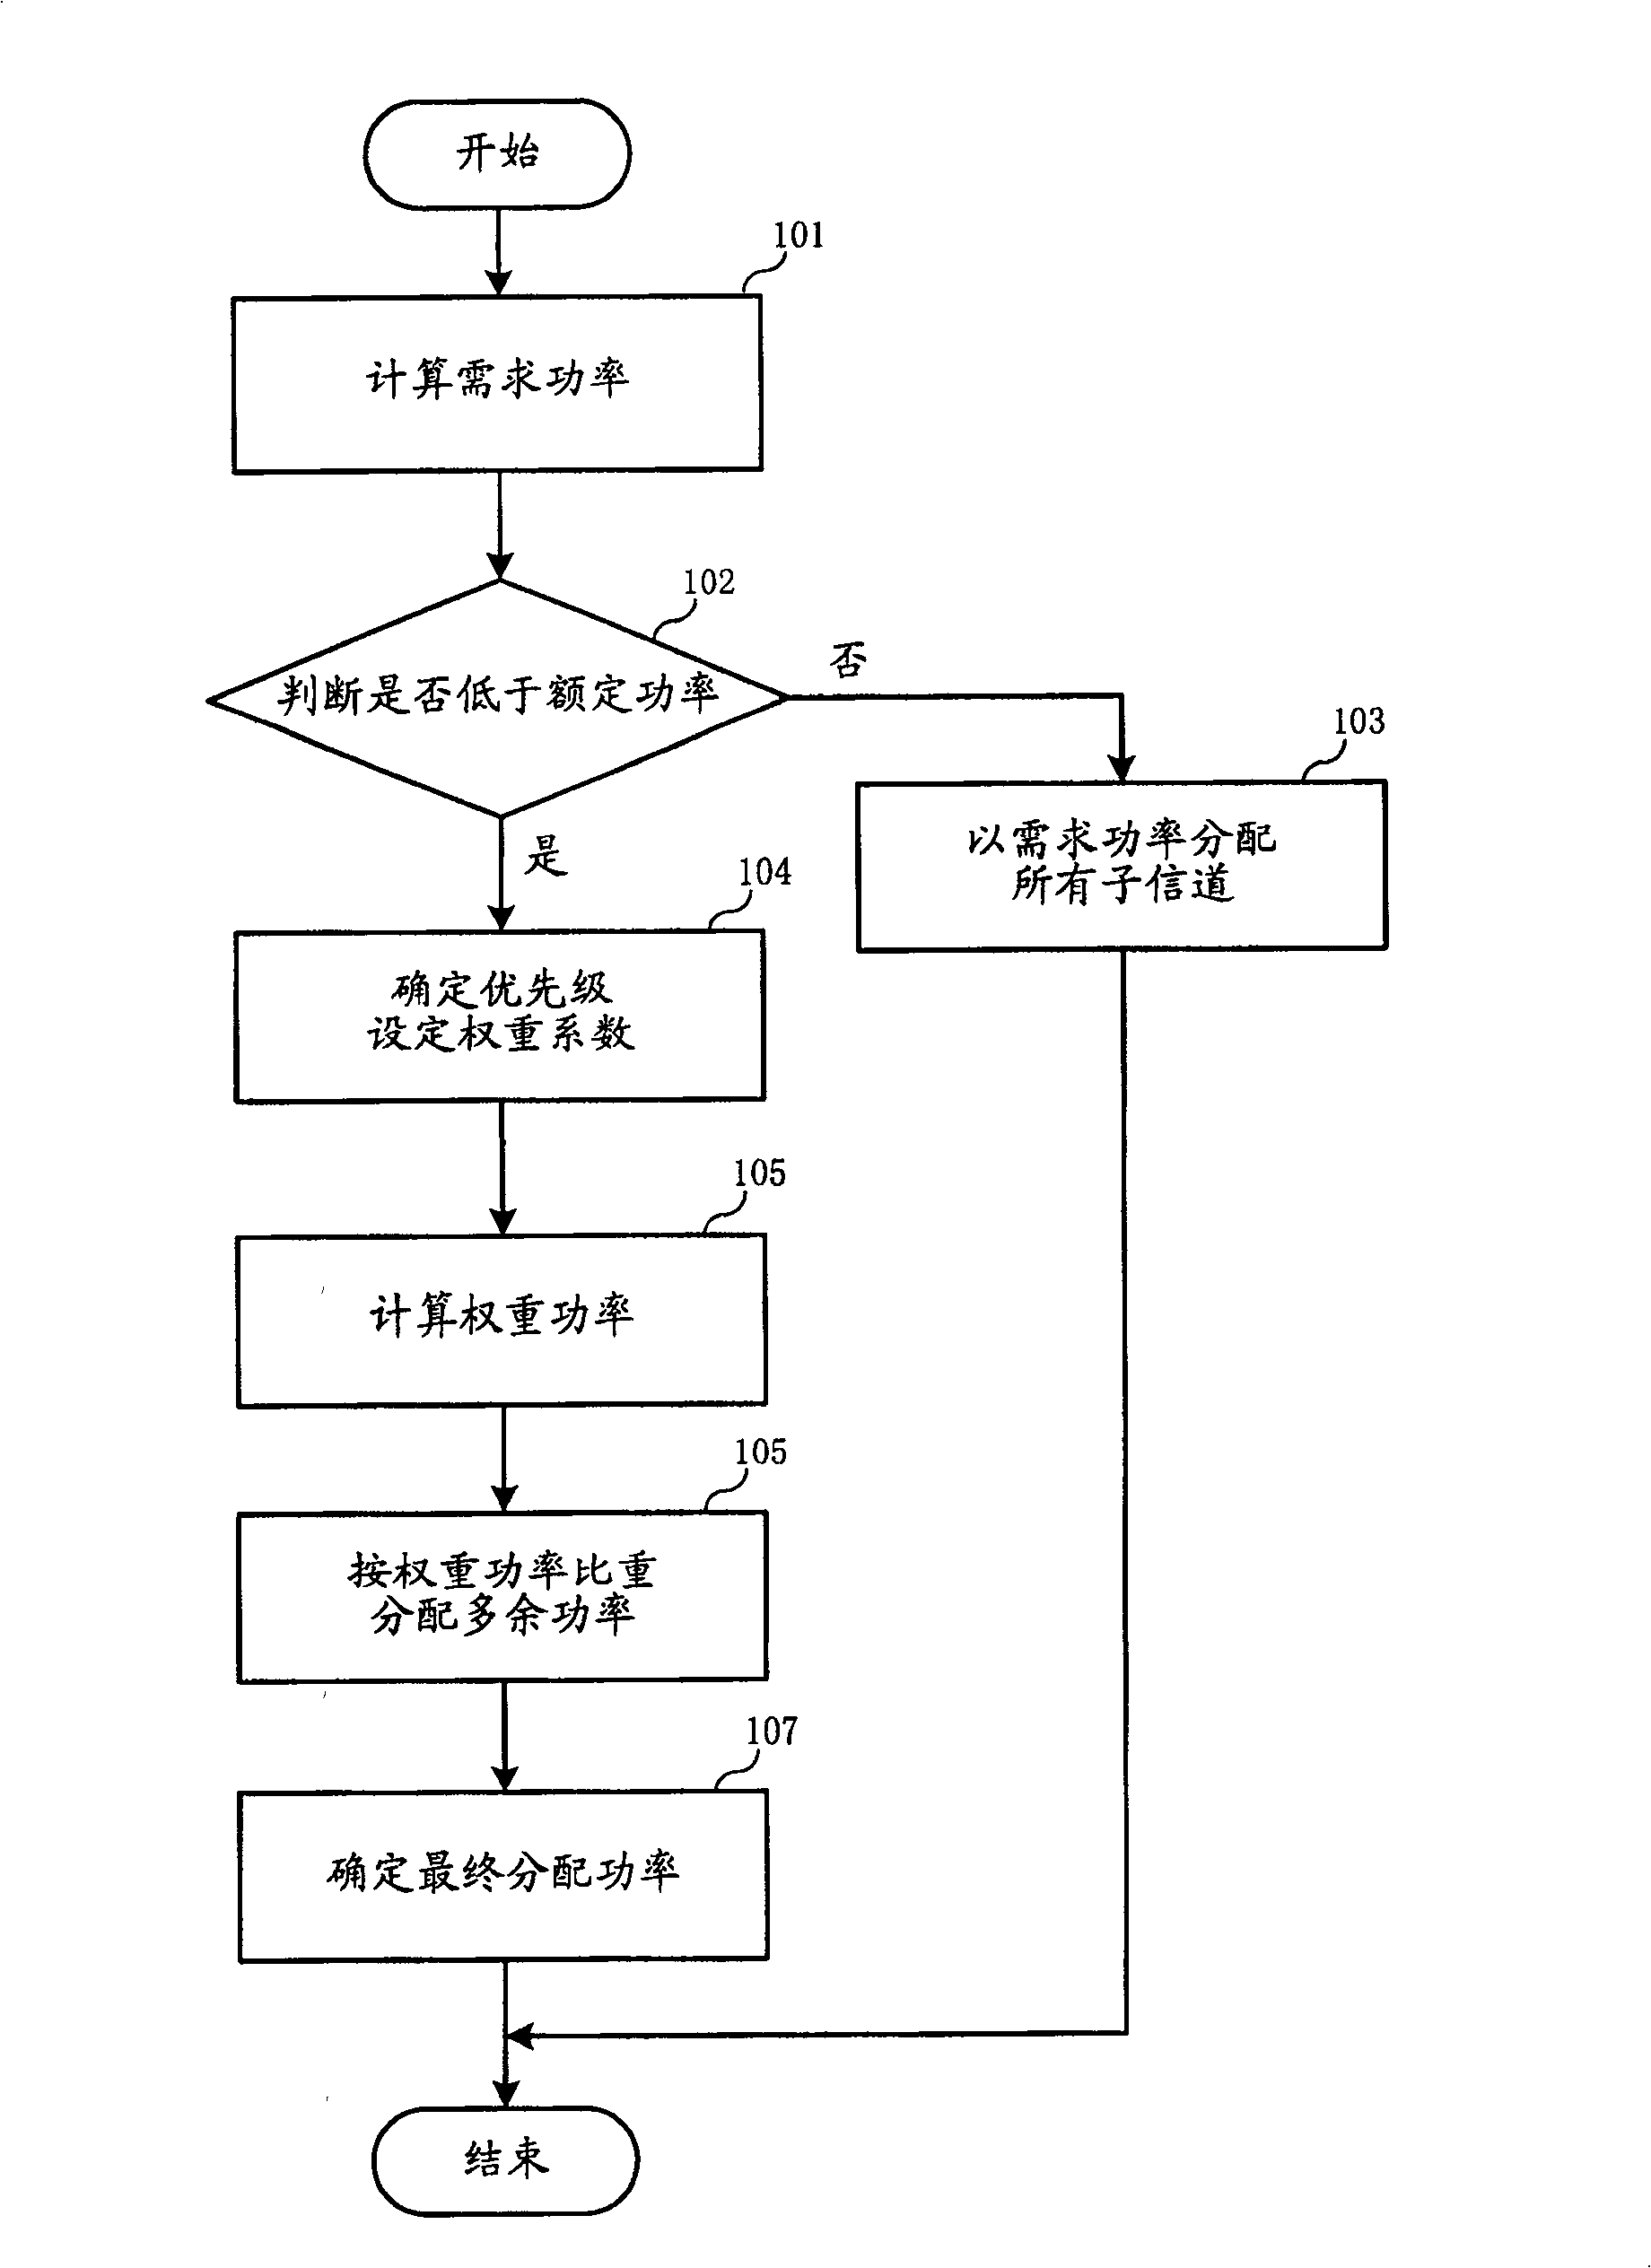 Channel surplus power distributing method in third generation mobile communication system